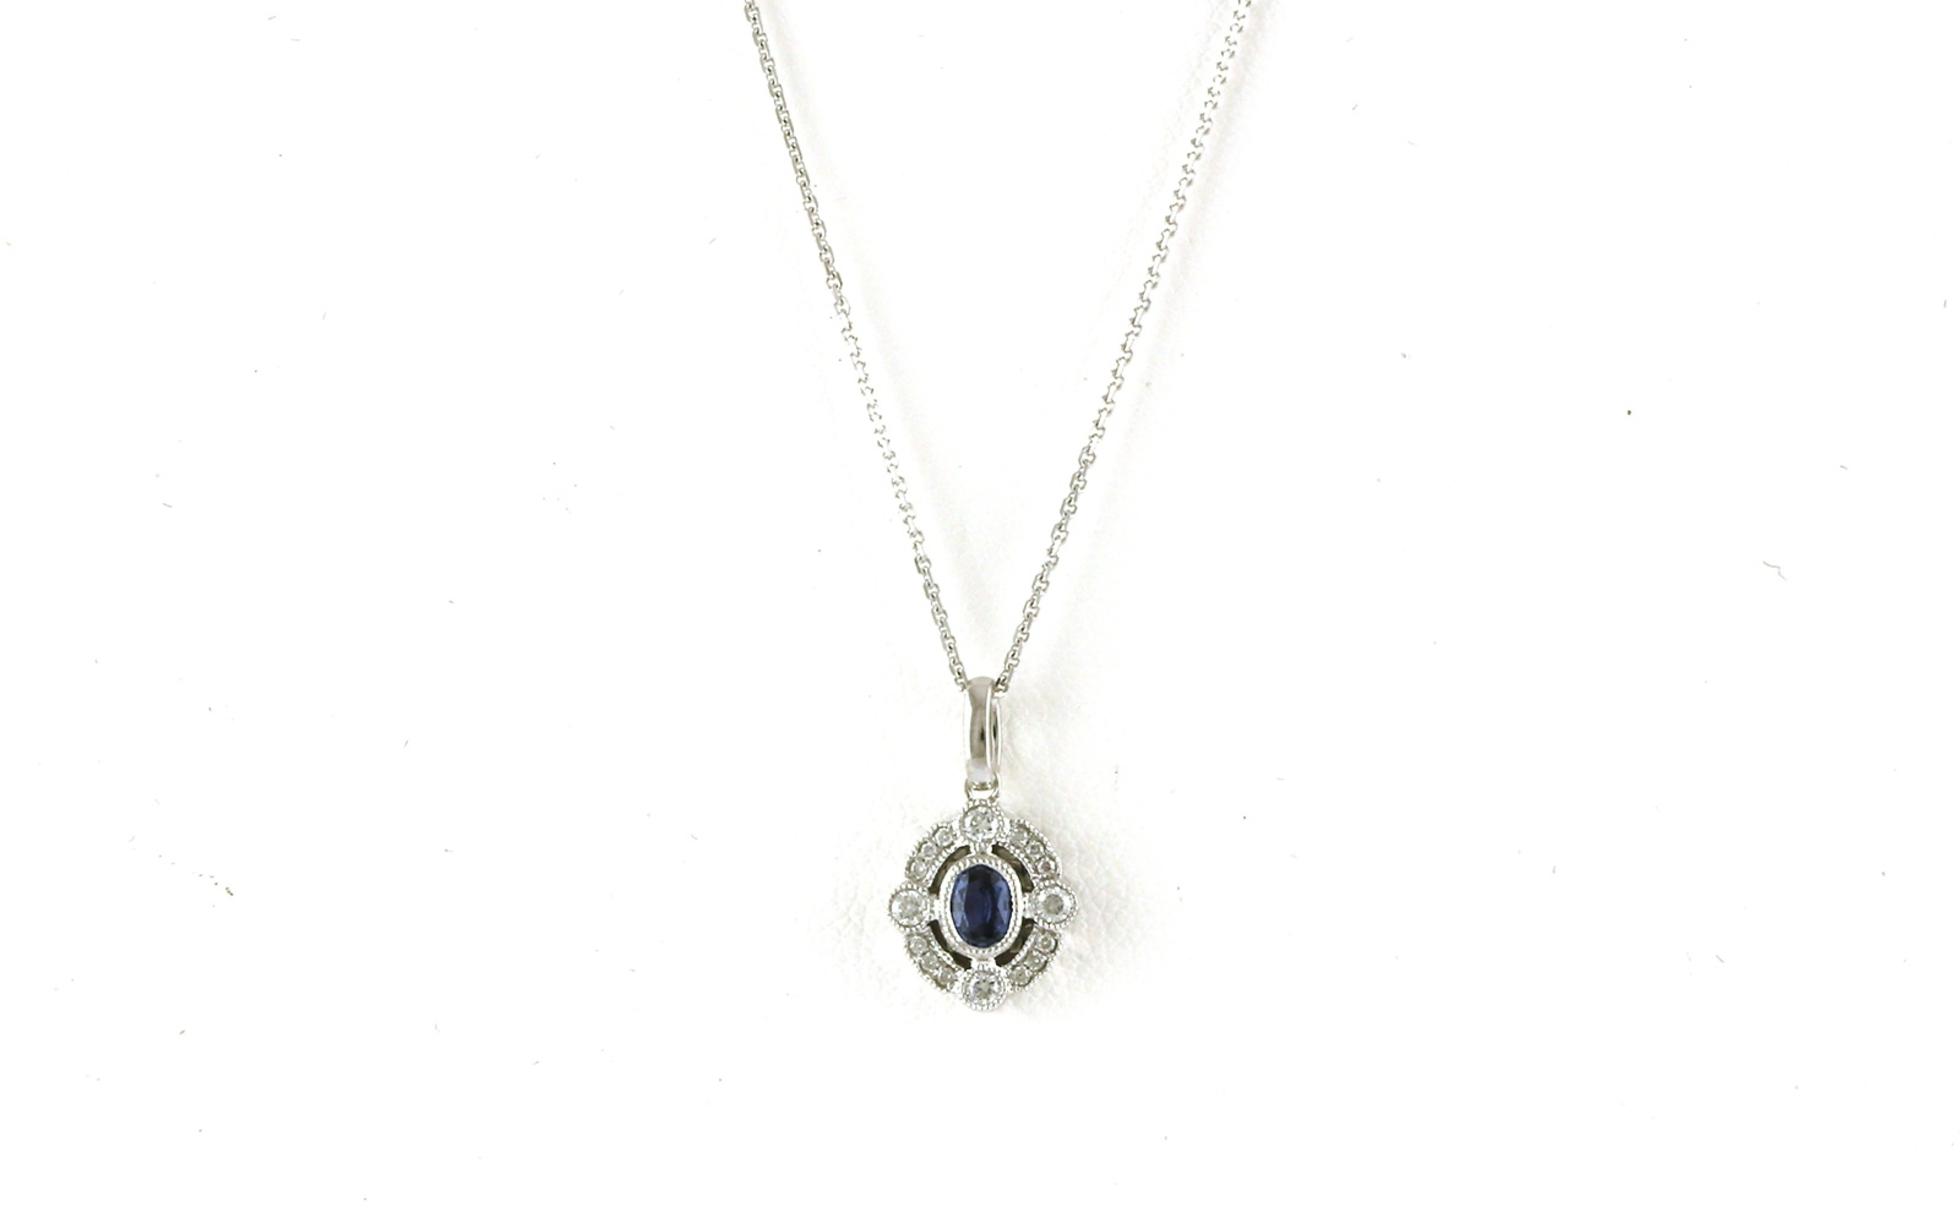 Vintage-style Halo Oval Montana Yogo Sapphire and Diamond Necklace in White Gold (0.28cts TWT)